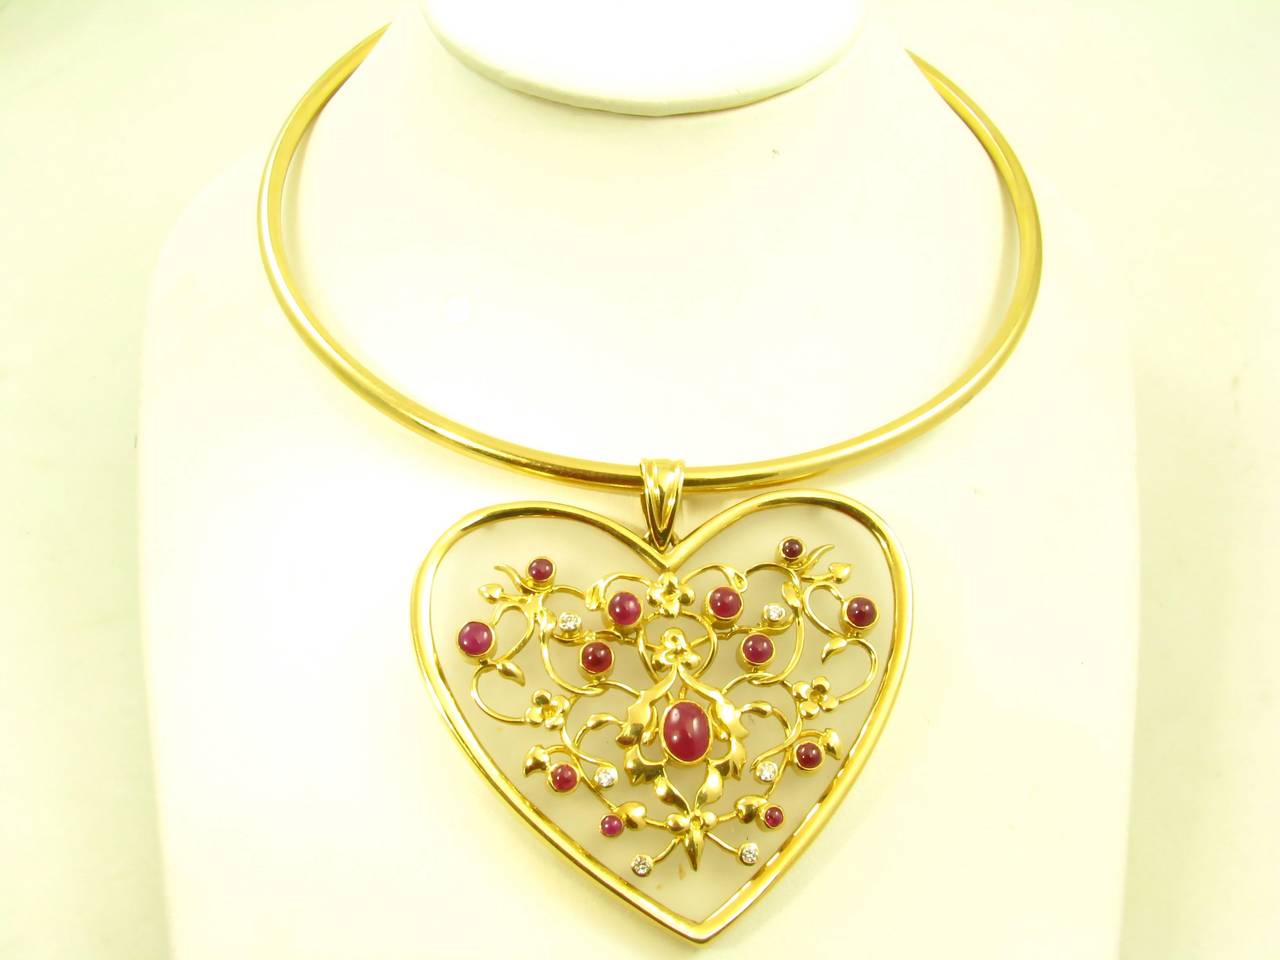 An 18 karat yellow gold , ruby and diamond frosted rock crystal pendant suspended from an 18 karat yellow gold neckwire, by Ilias Lalaounis, Greece, circa 1980s.  The pendant is set with 13 cabochon rubies and 6 round brilliant cut diamonds, the 6